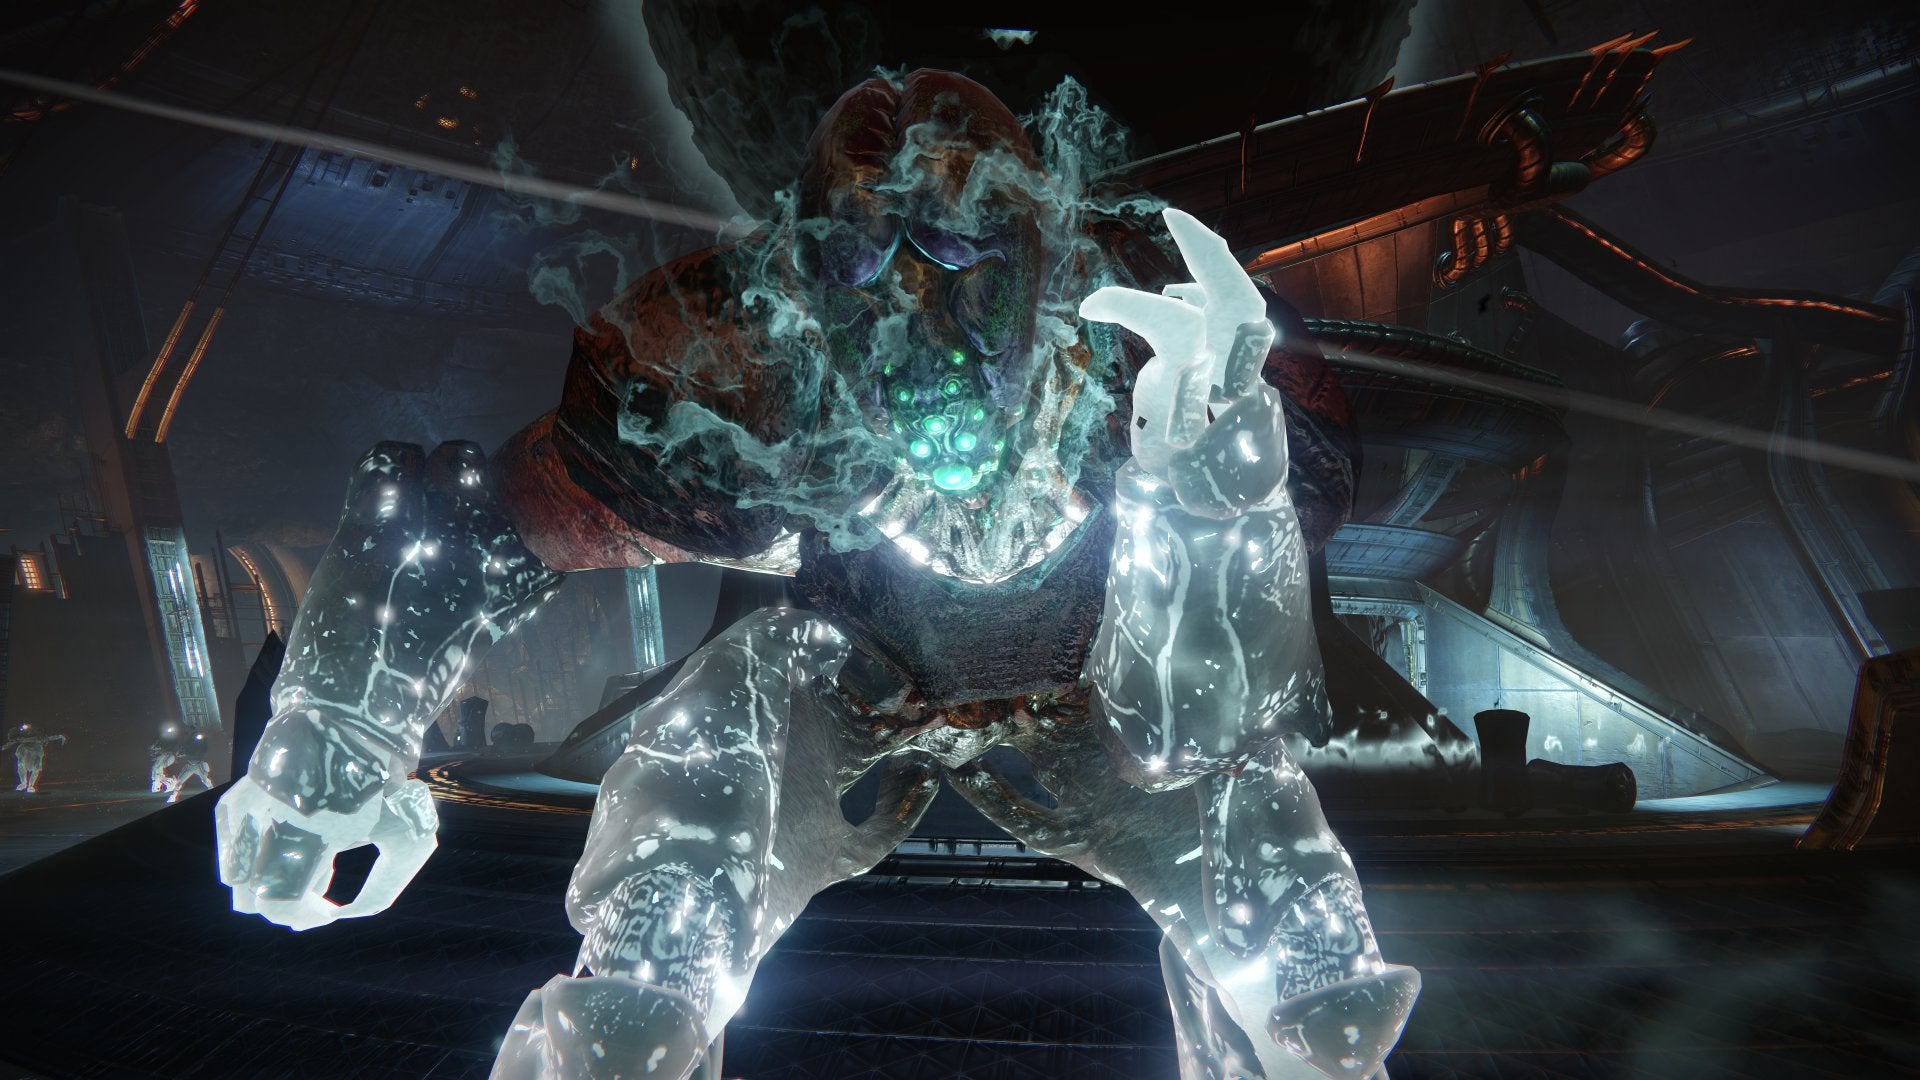 Image for Destiny April update: here's a look at the new Strikes, Prison of Elders, quests